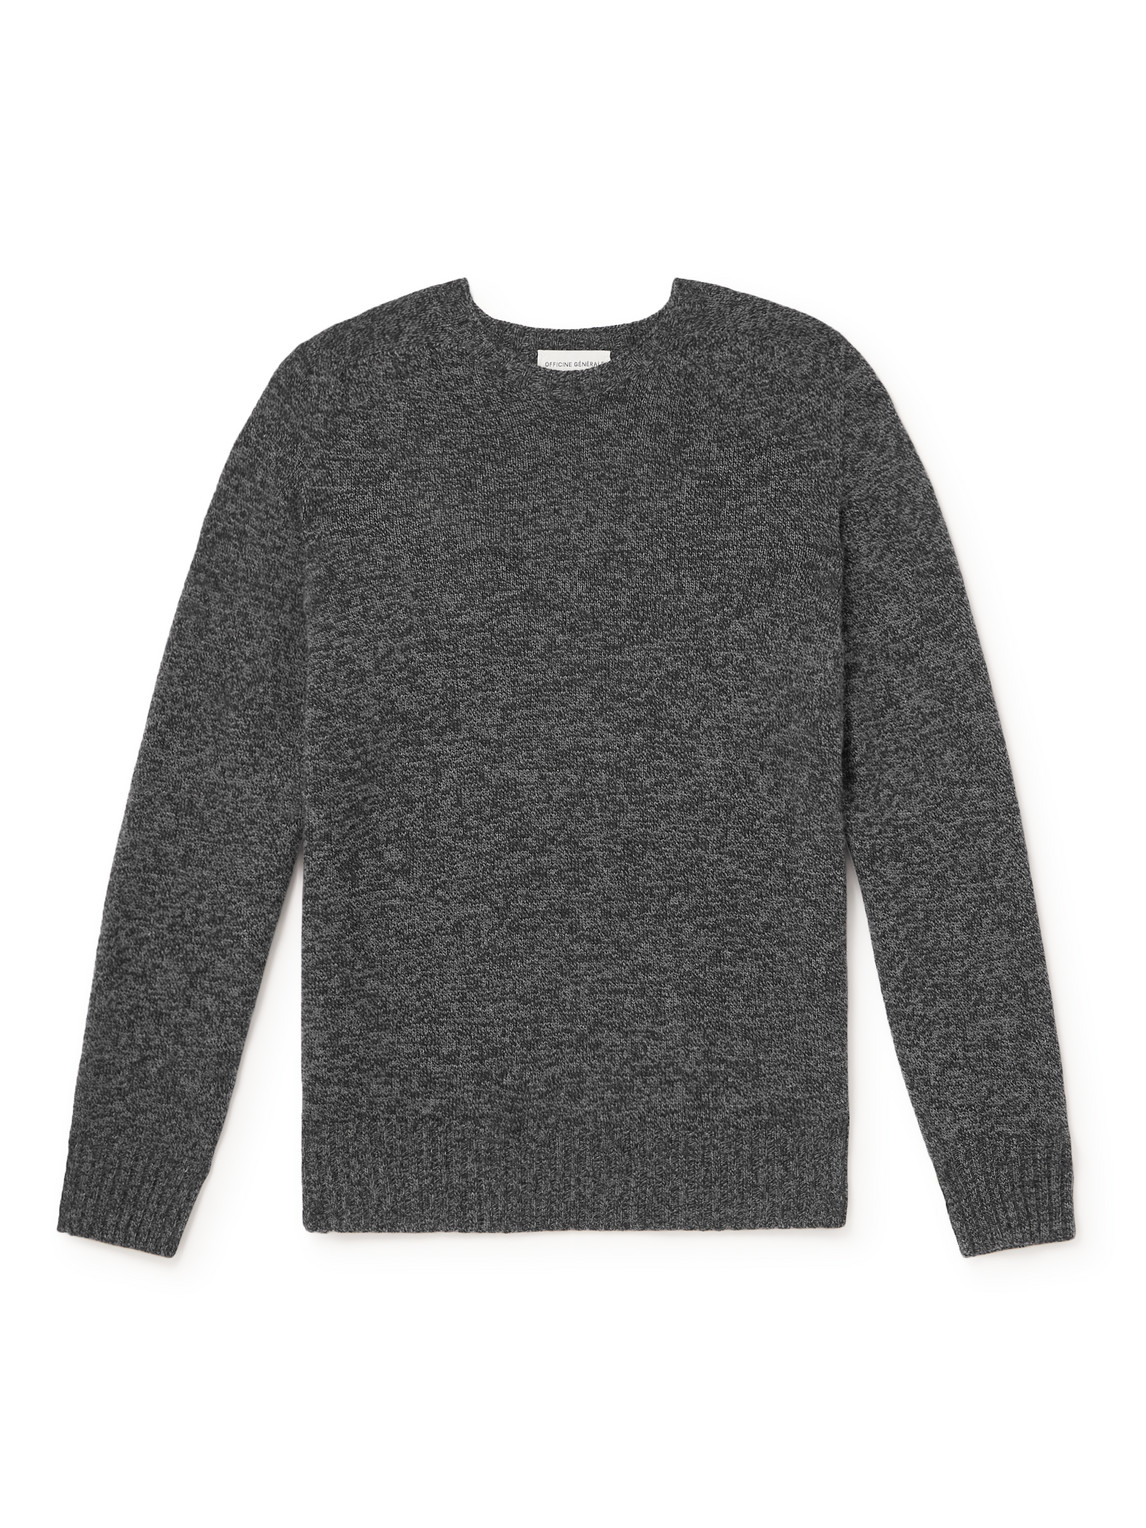 Officine Générale Merino Wool and Cashmere-Blend Sweater